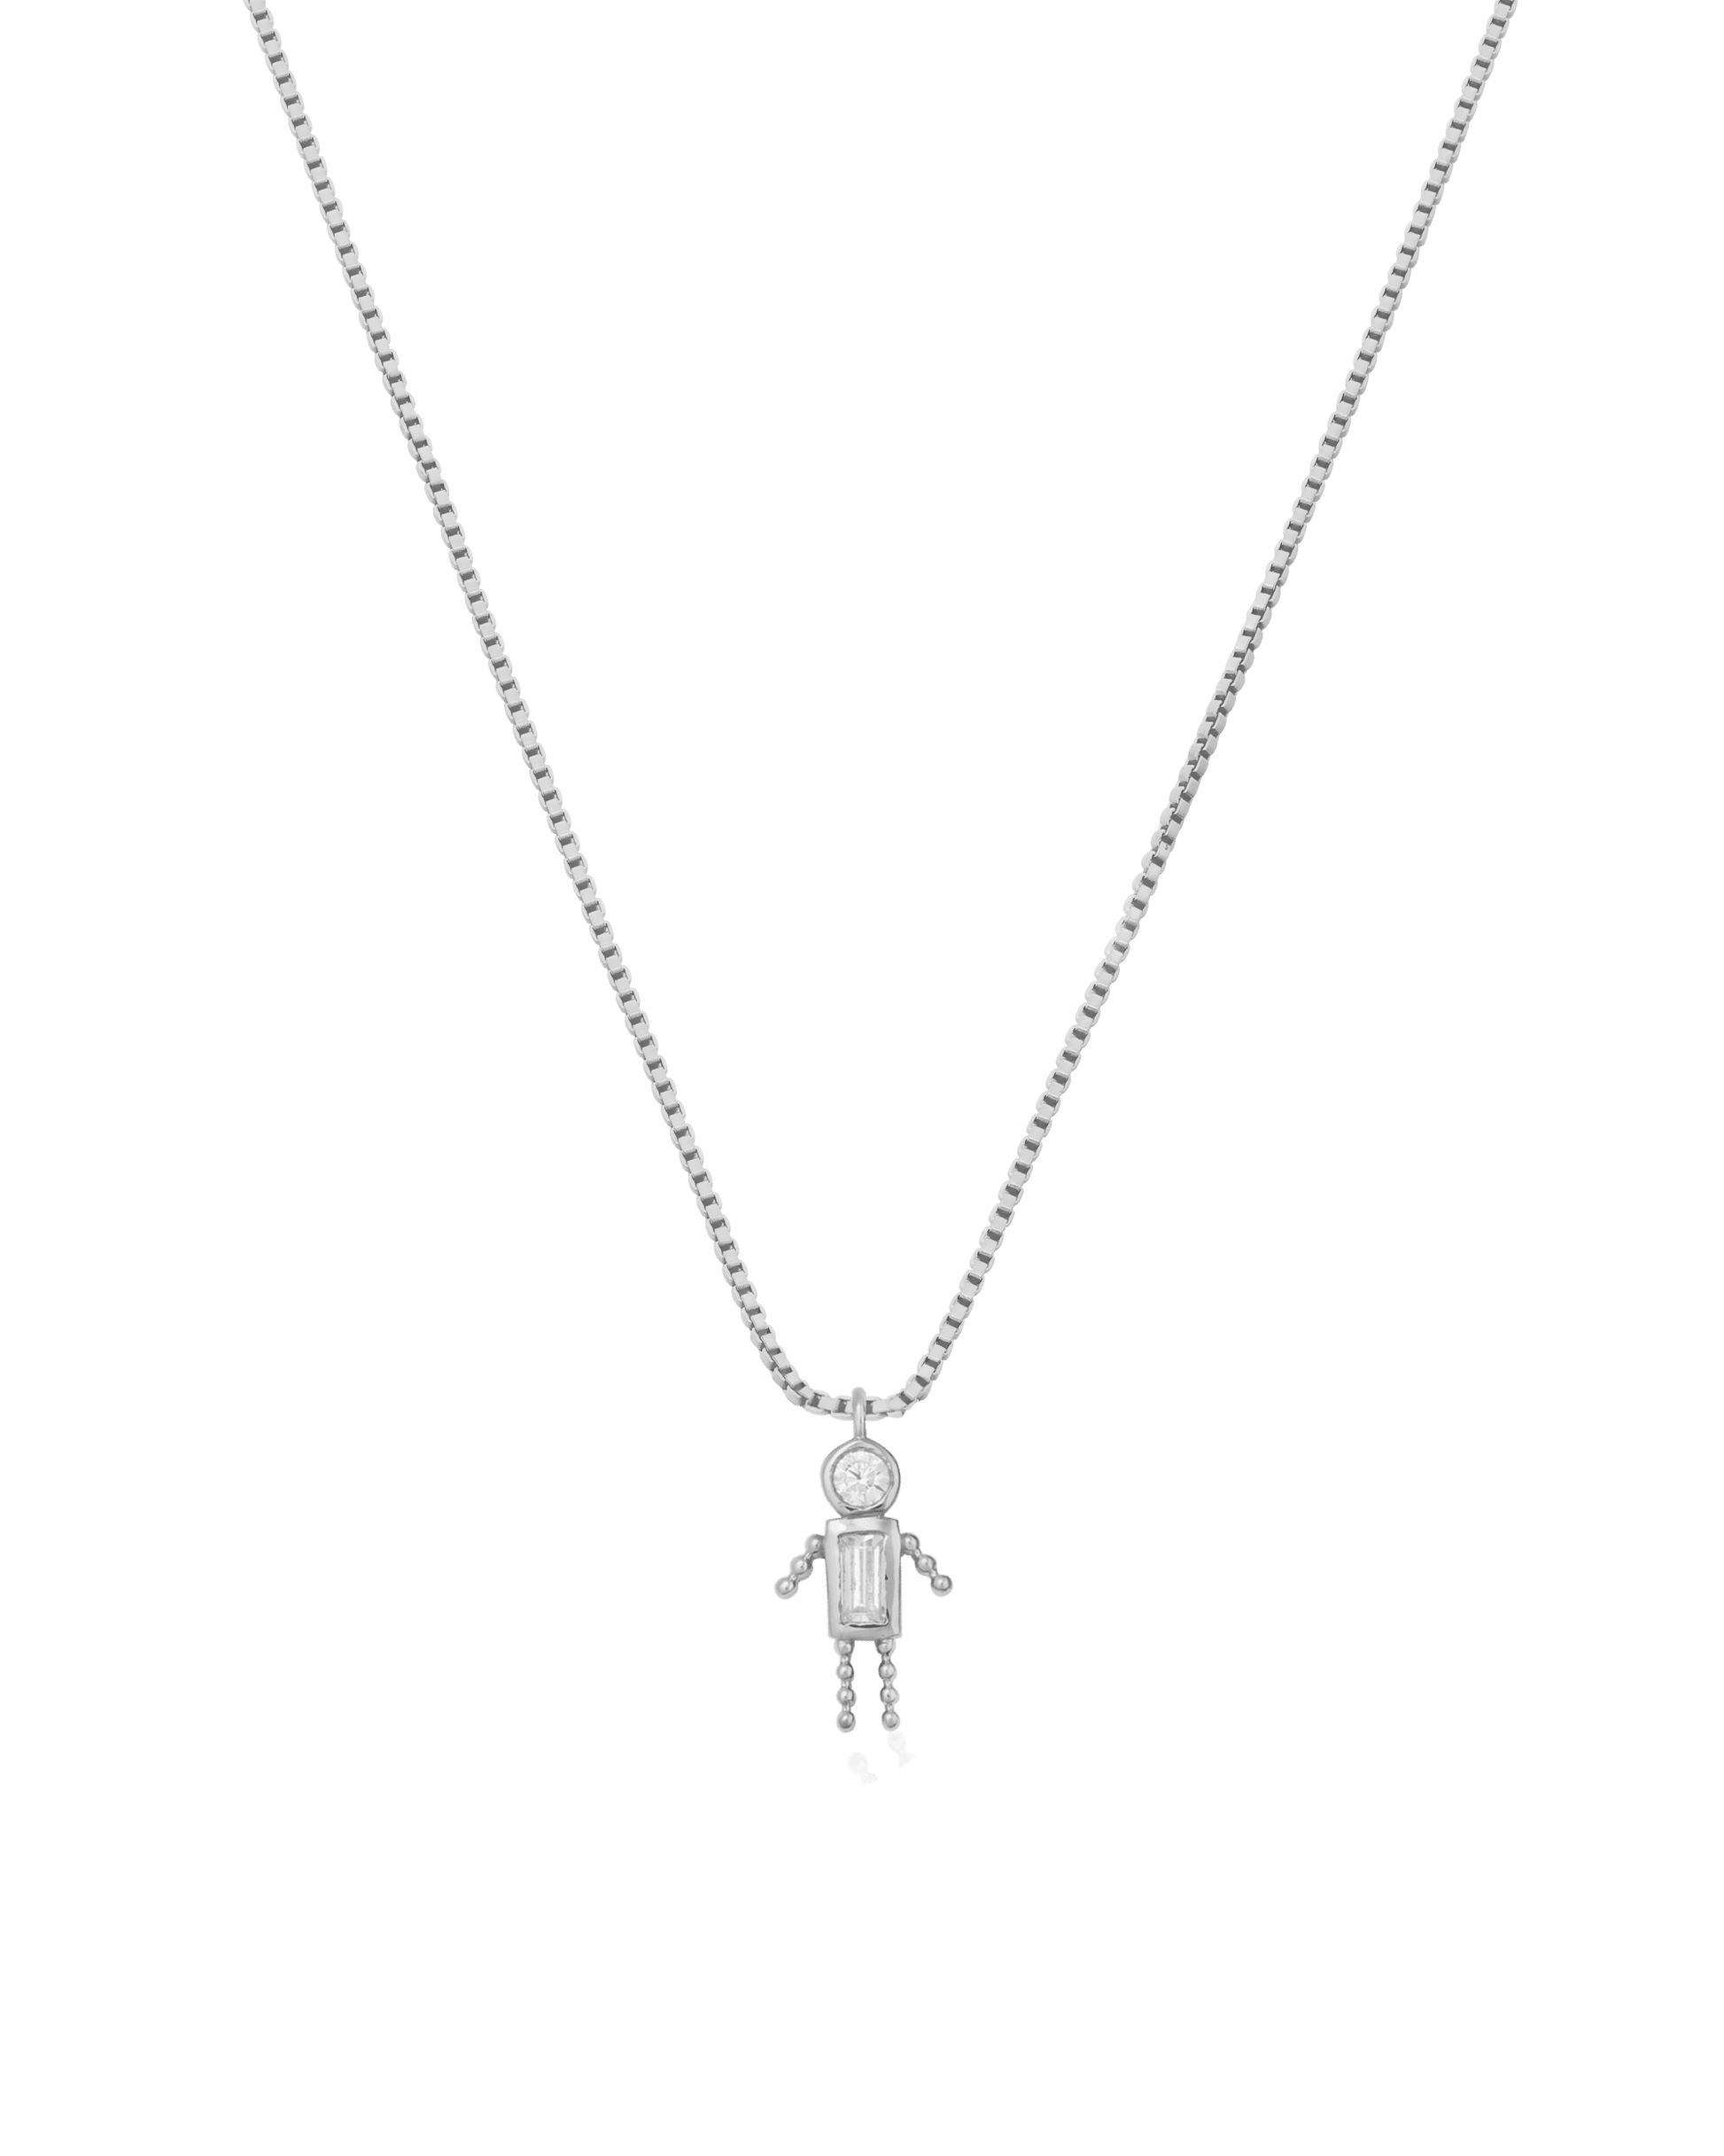 Single Mini Me Necklace - 925 Sterling Silver Necklaces magal-dev 1 Small - 16" 